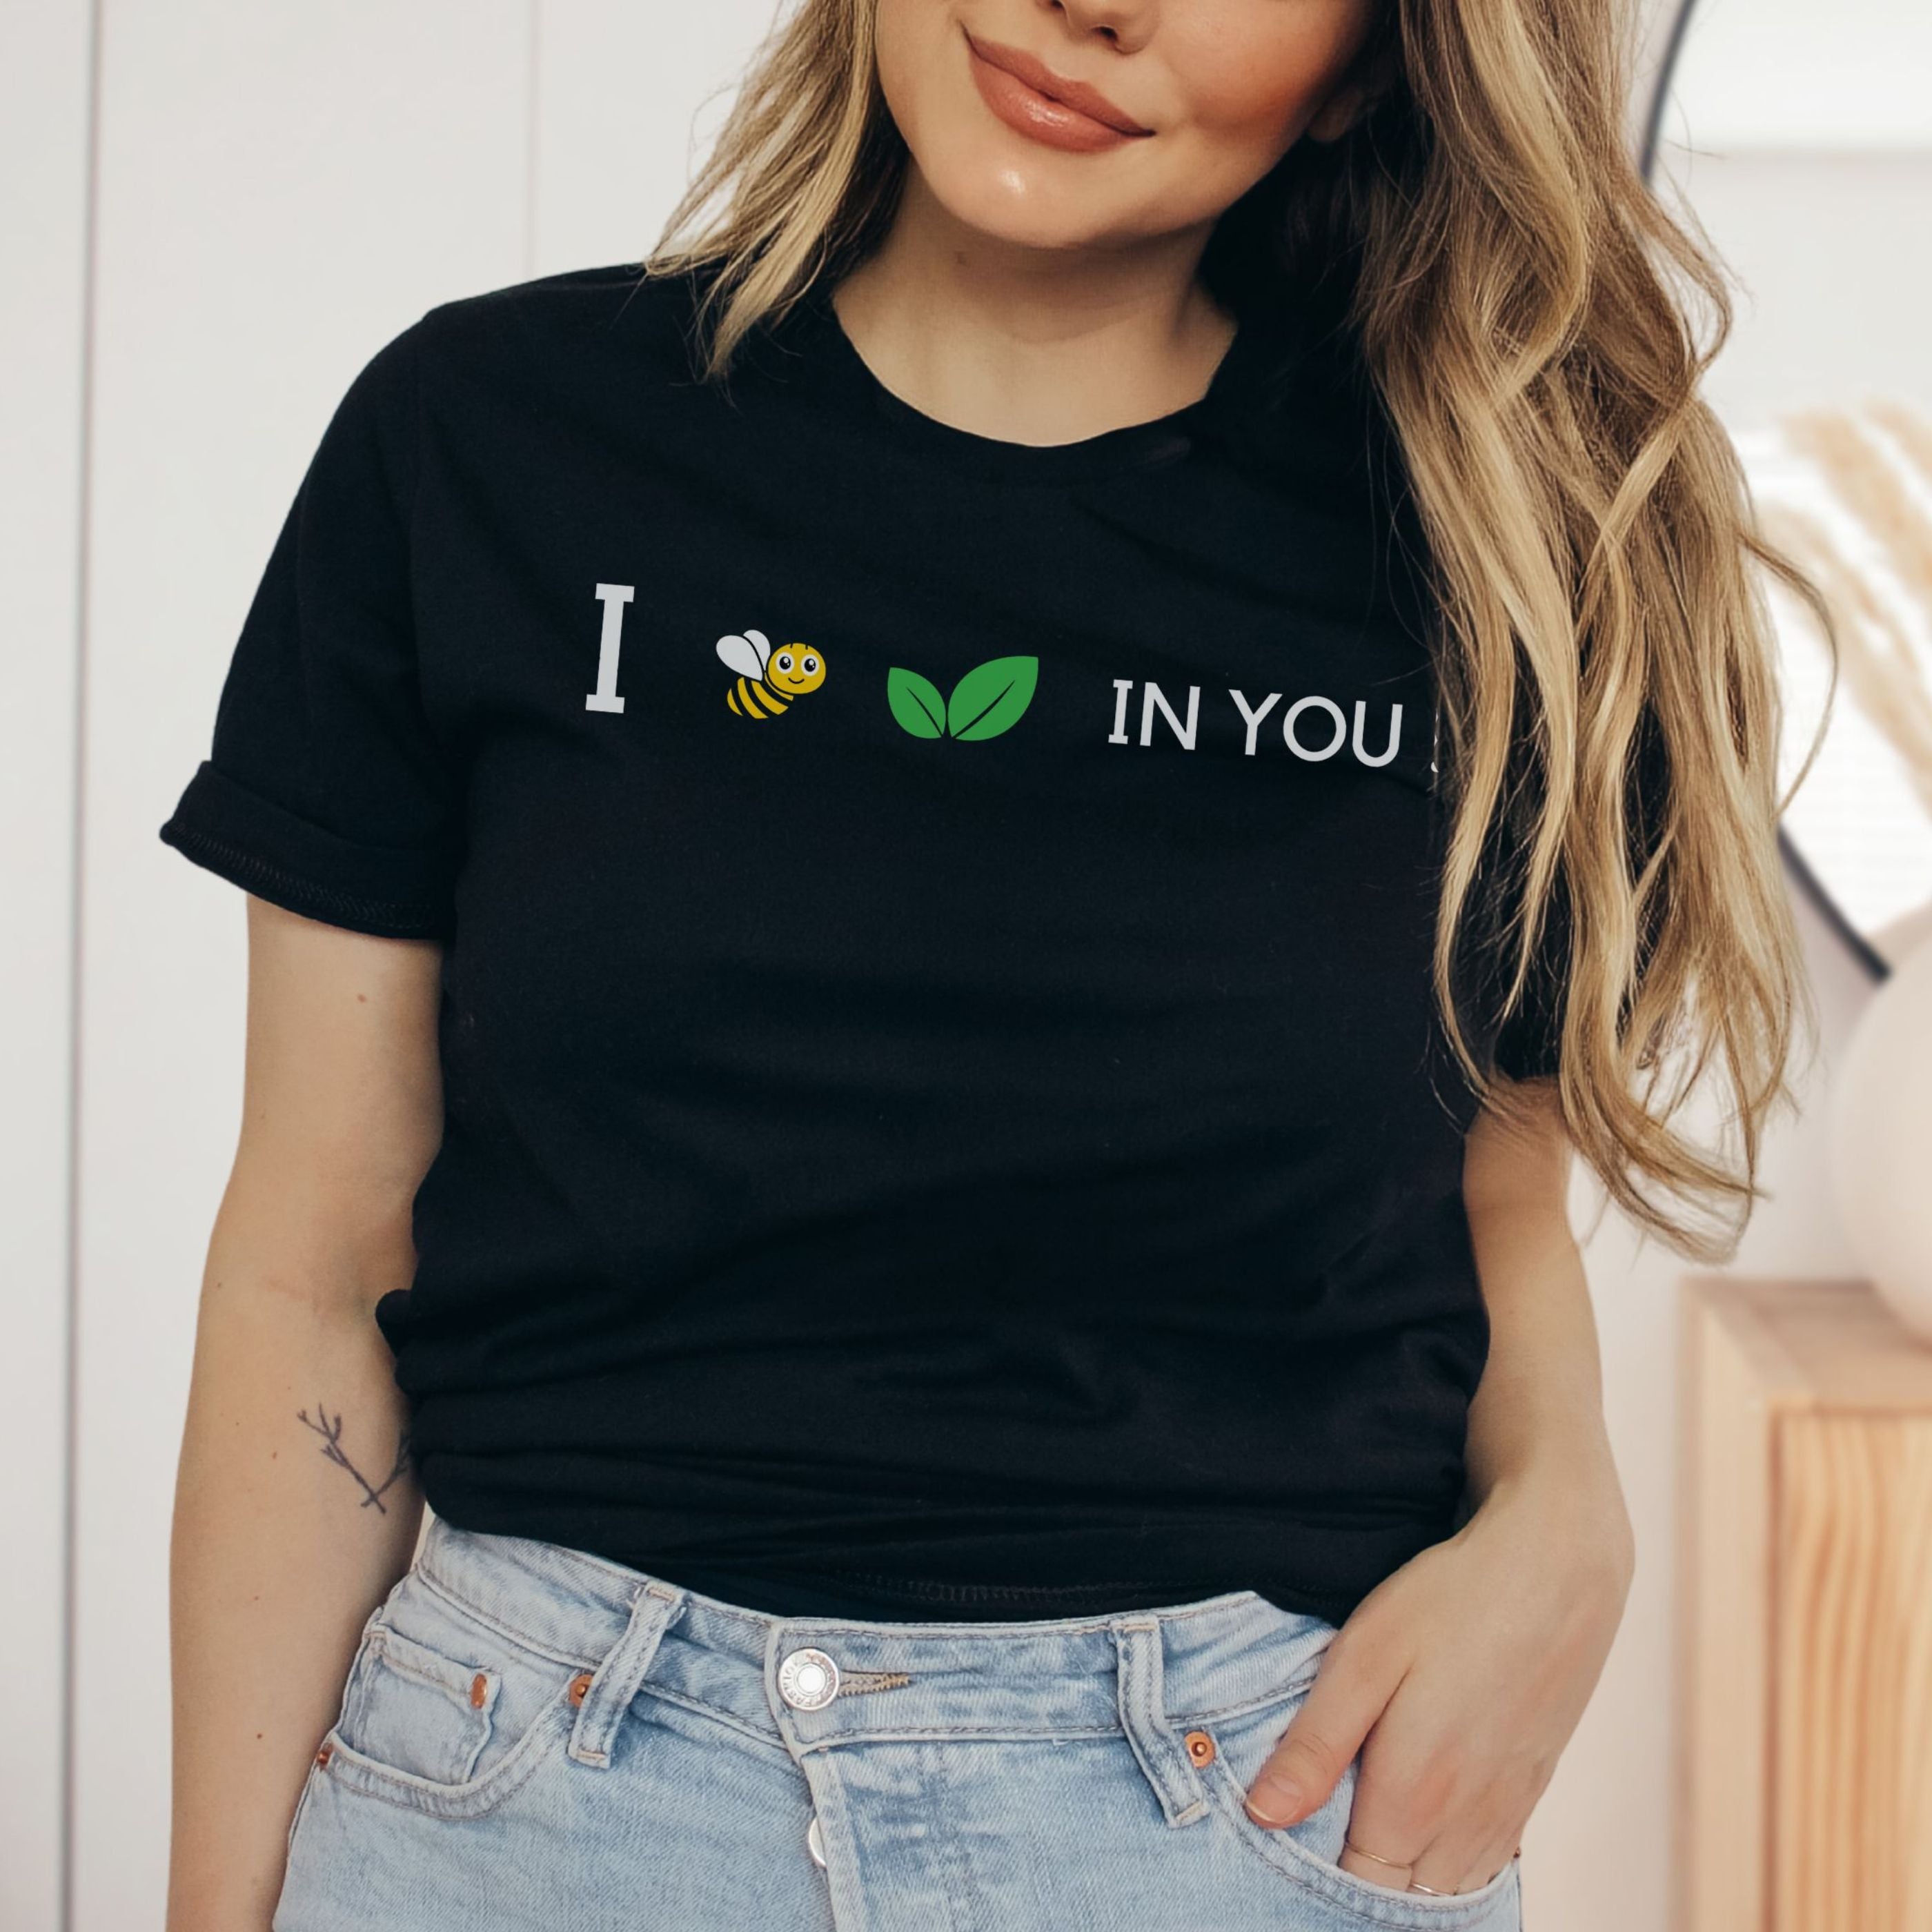 I Believe in You Shirt